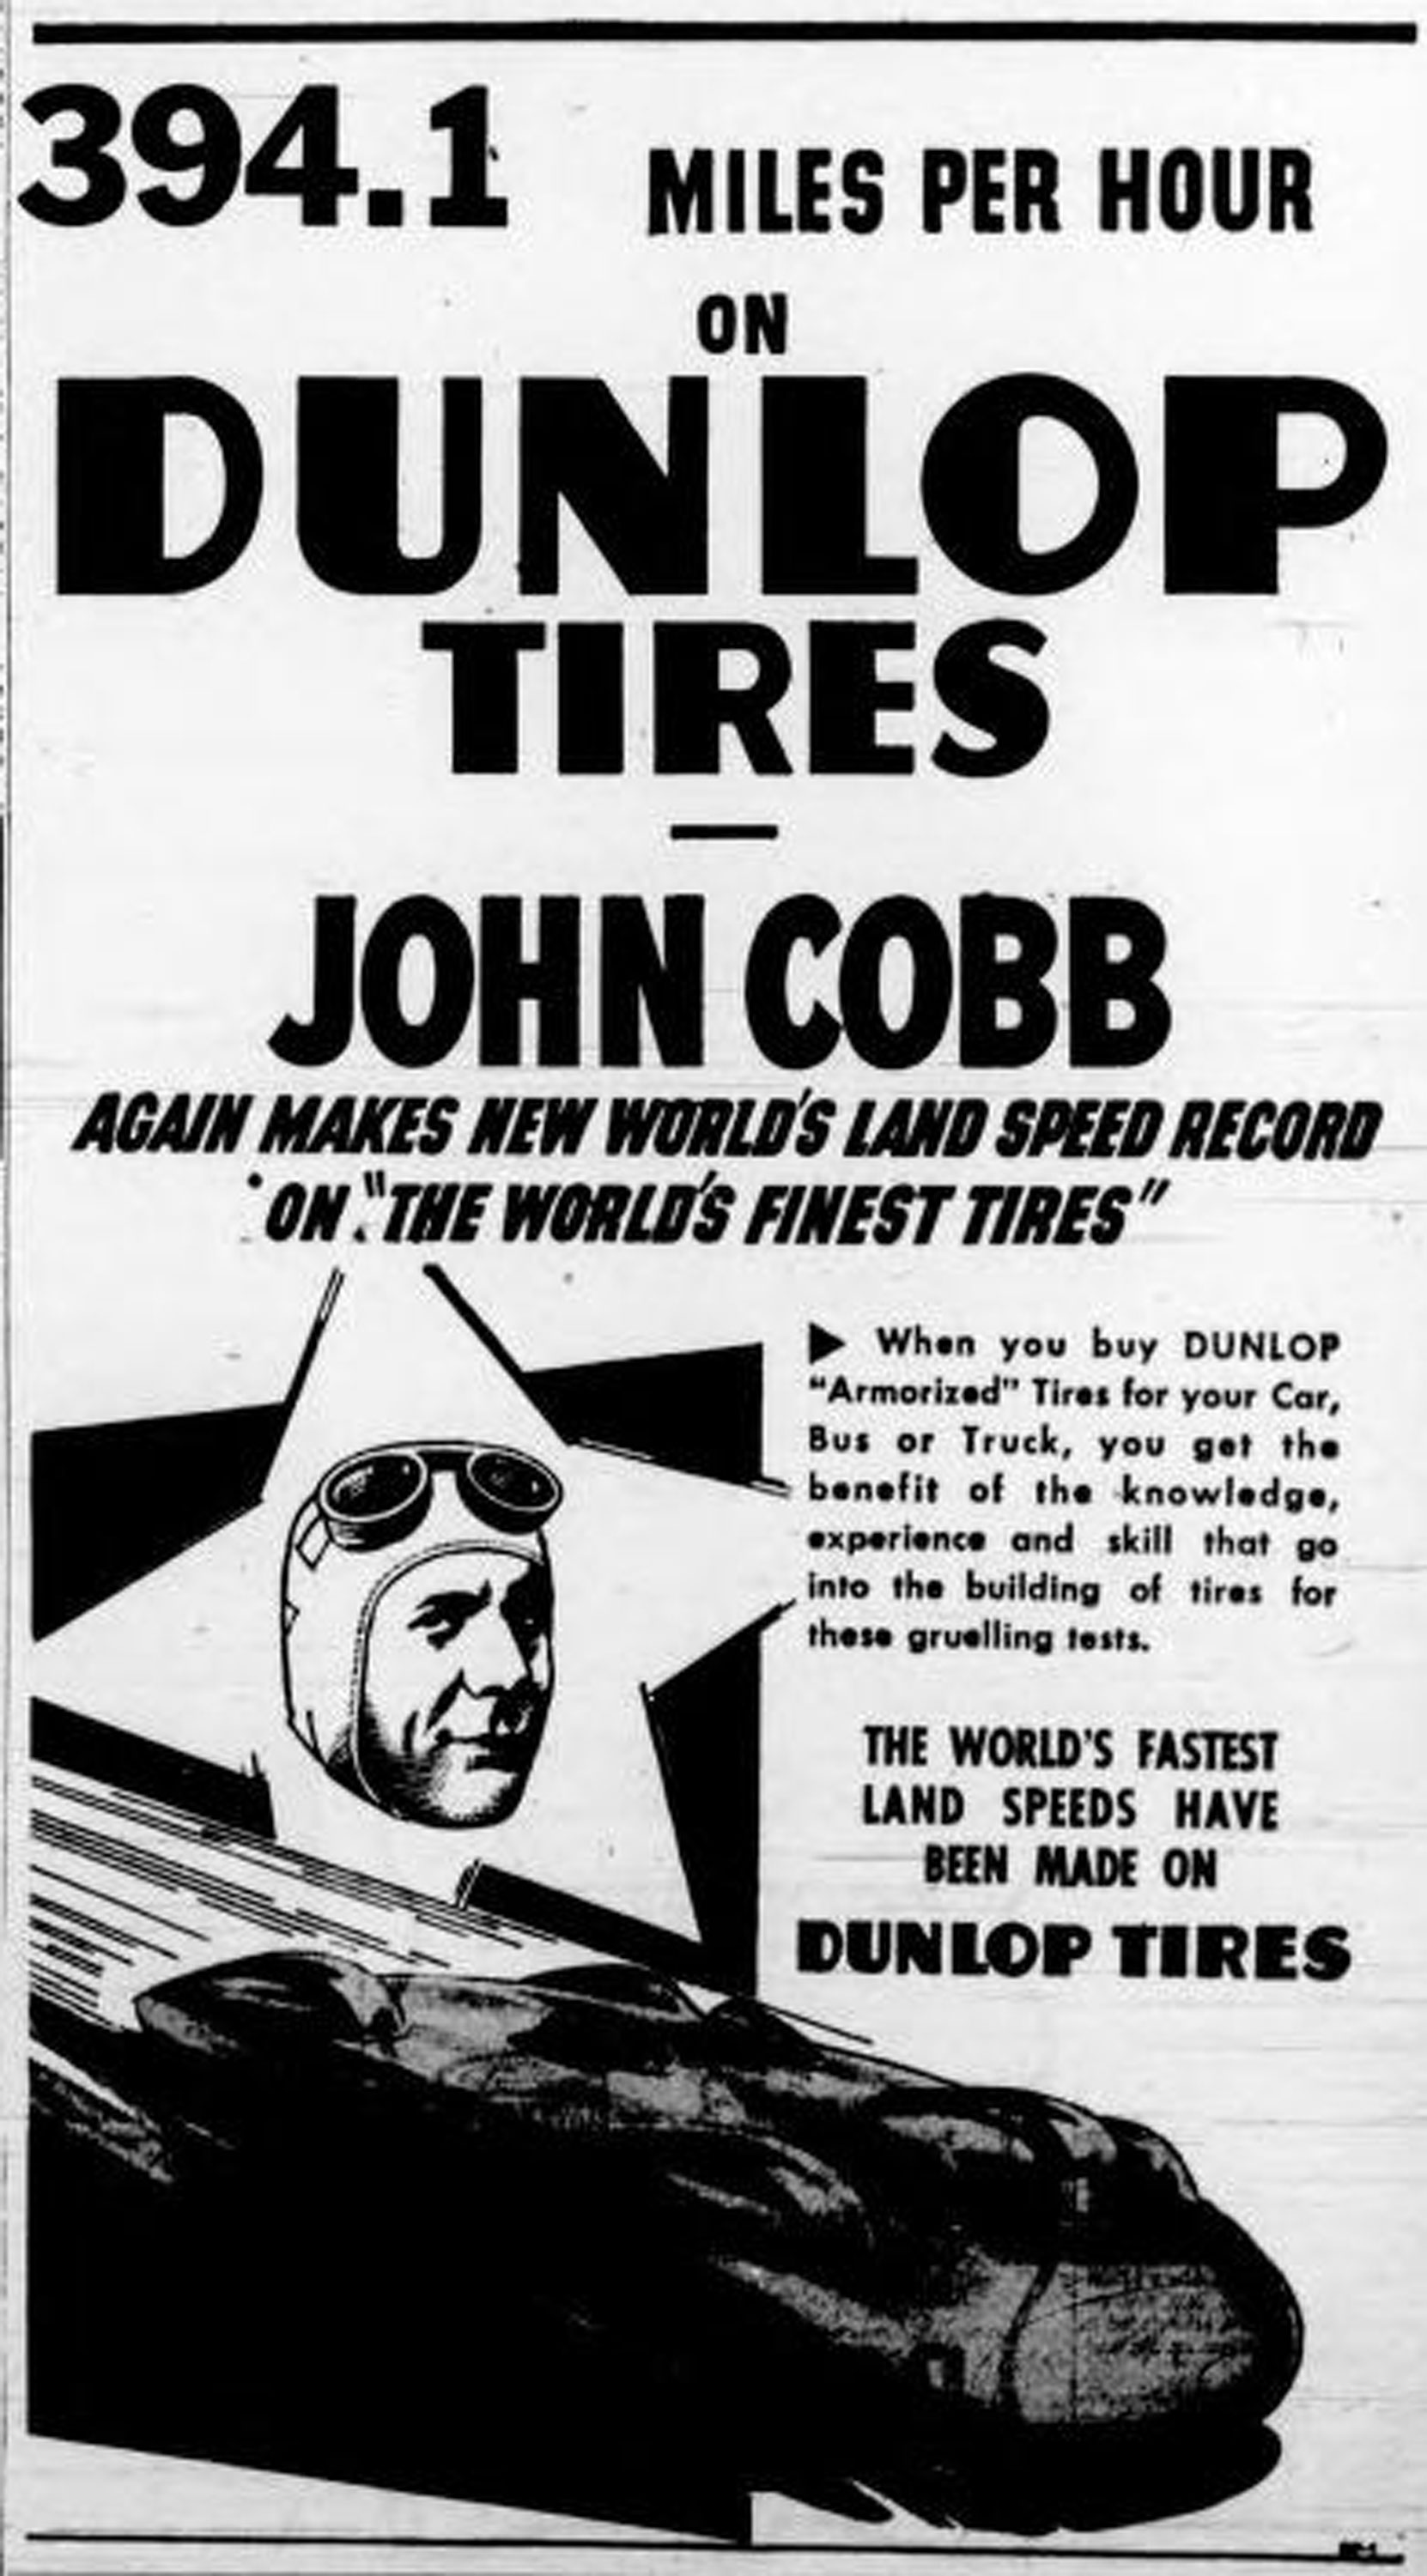 1947 advertisement for Dunlop Tires, featuring British racing driver John Cobb (West Coast Driver Training collection)